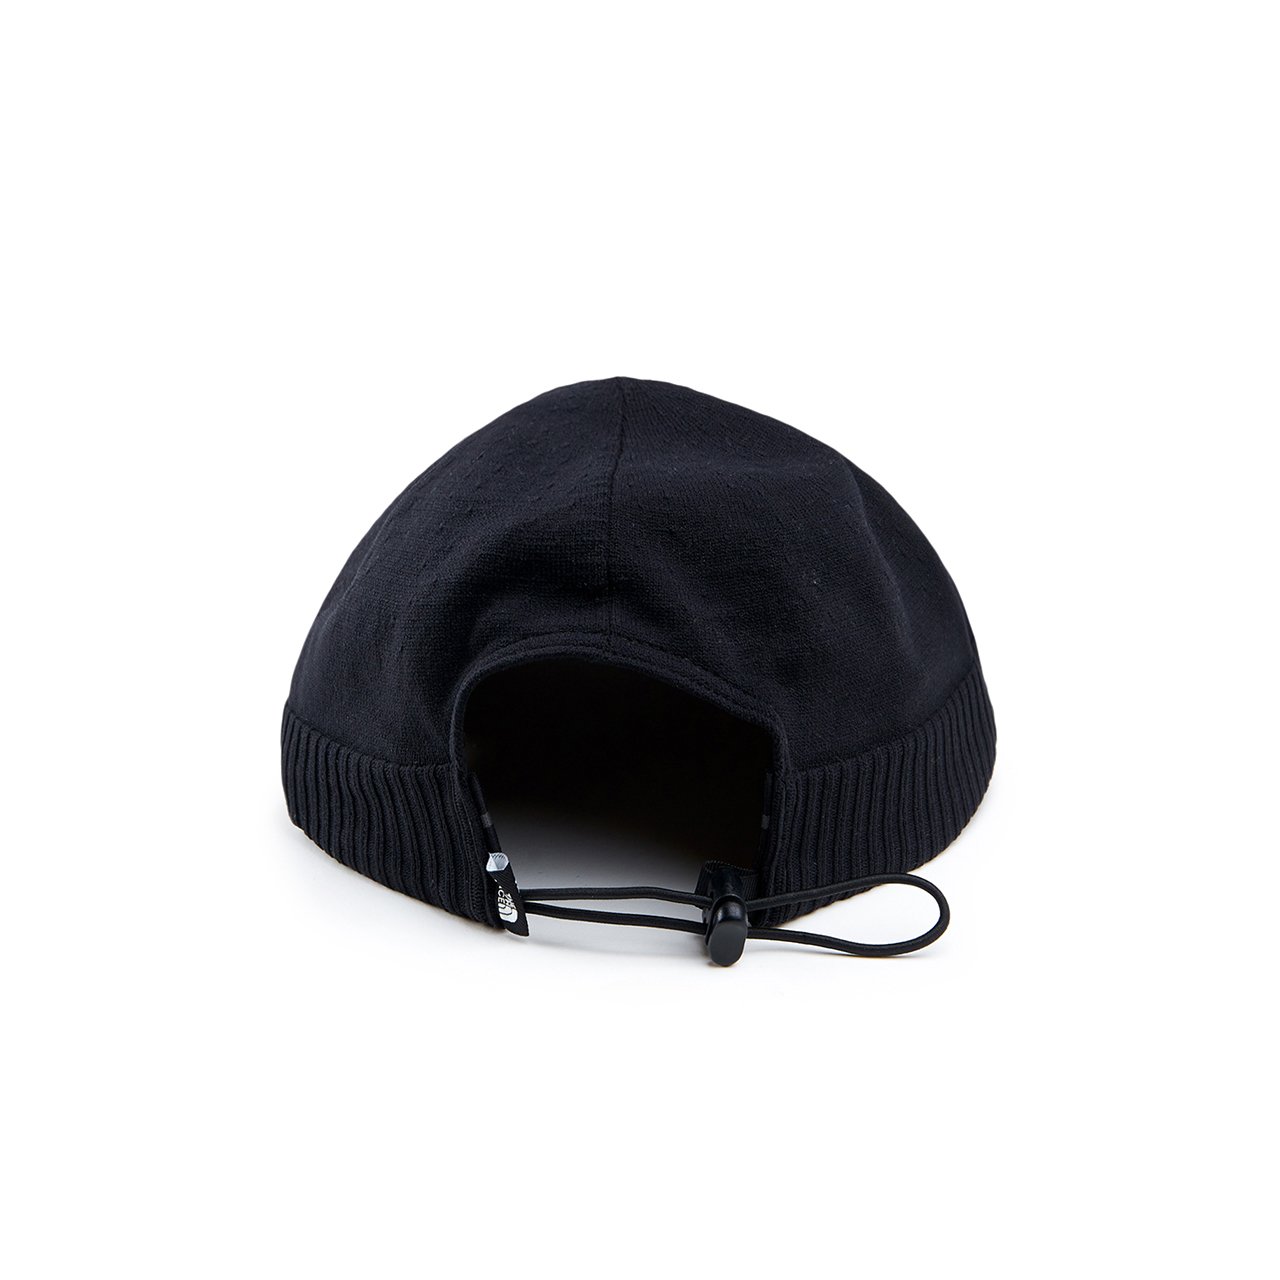 the north face black series knit cap (black) - nf0a3shijk3 - a.plus - Image - 2